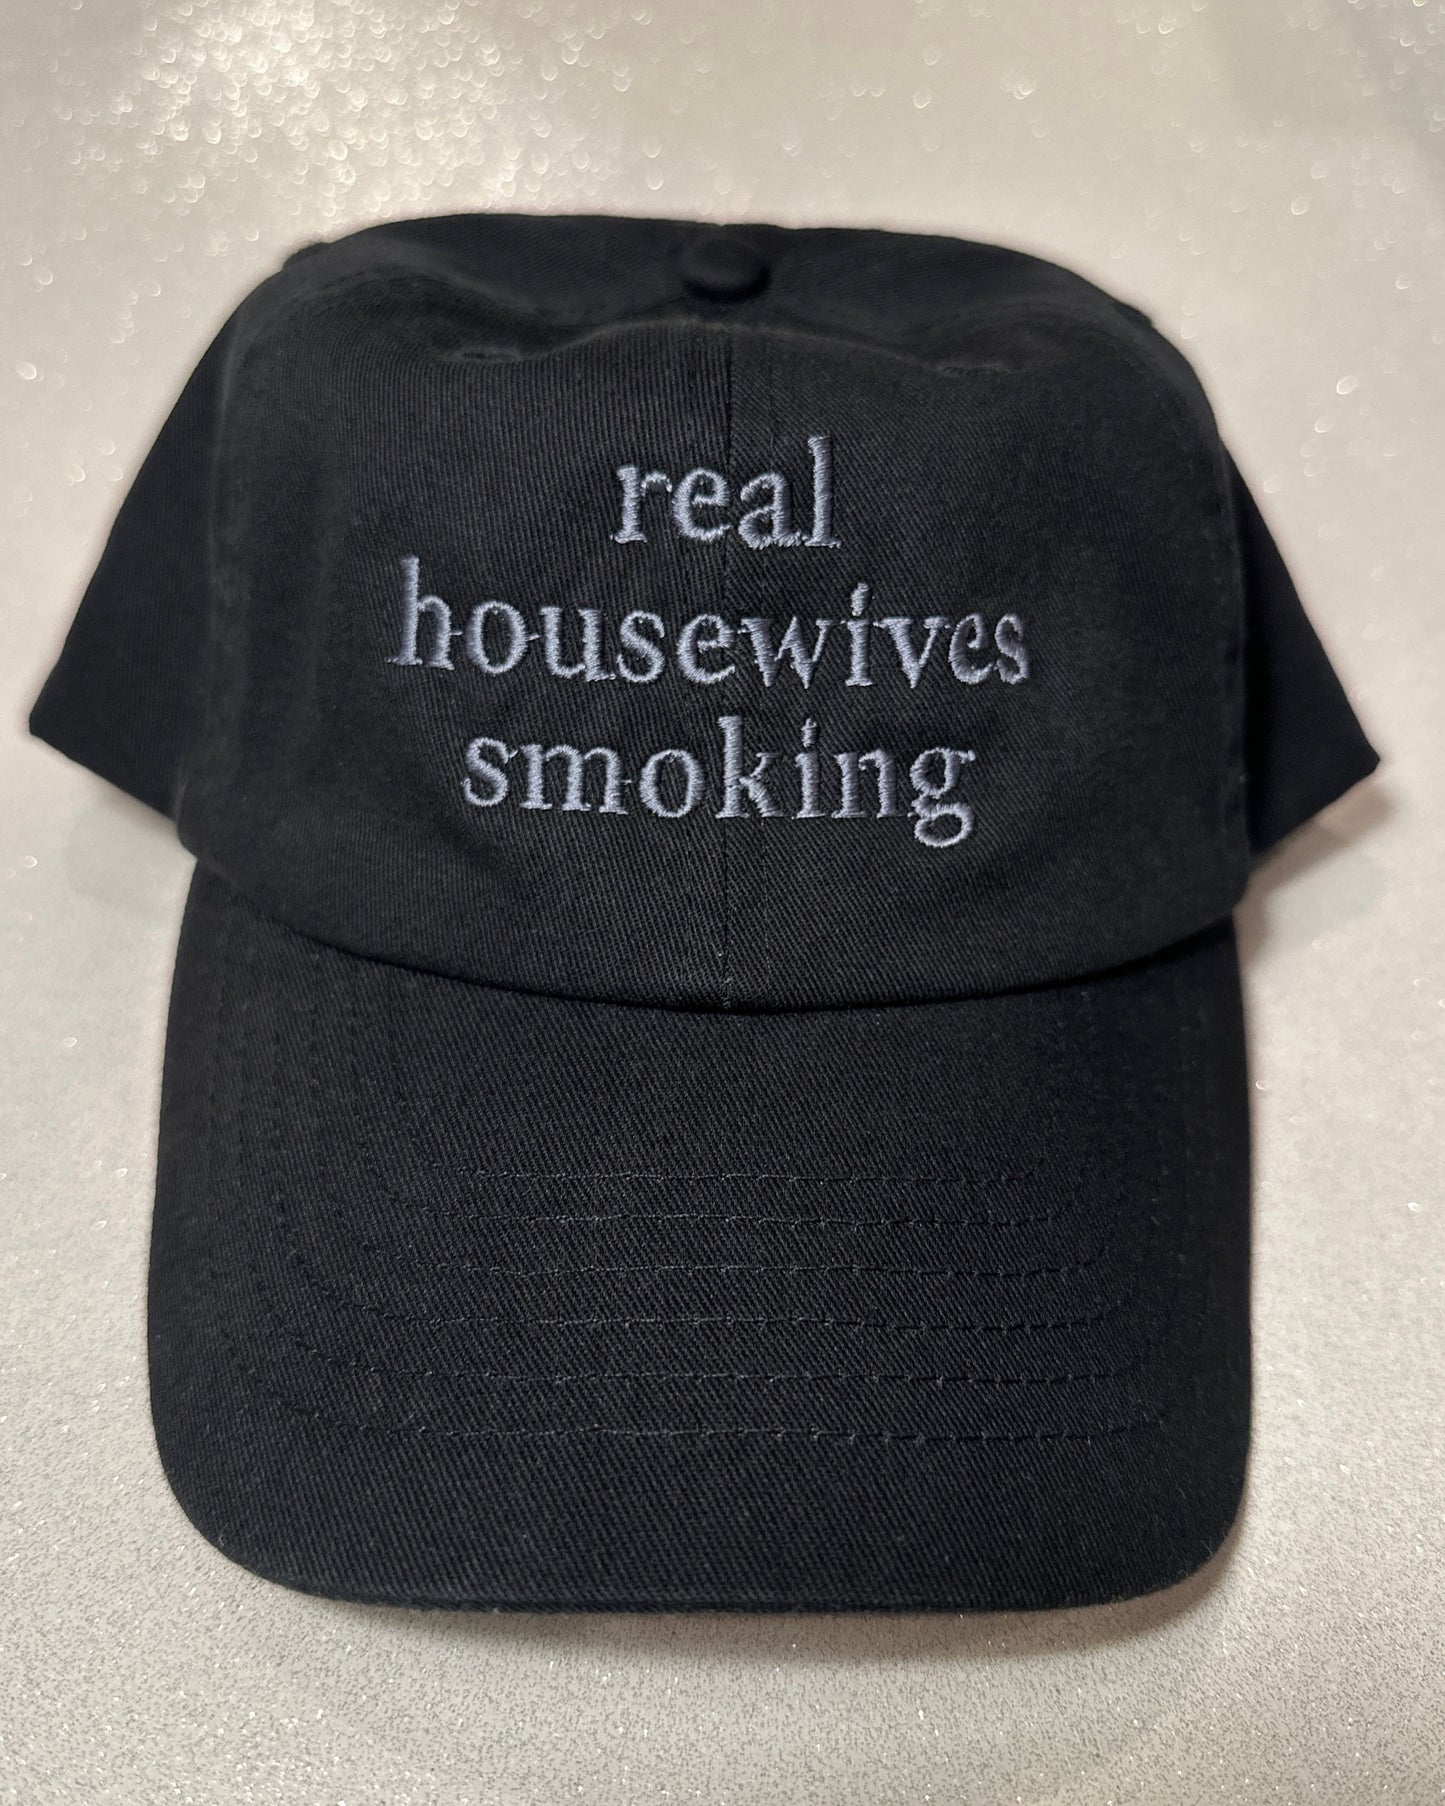 real housewives smoking hat